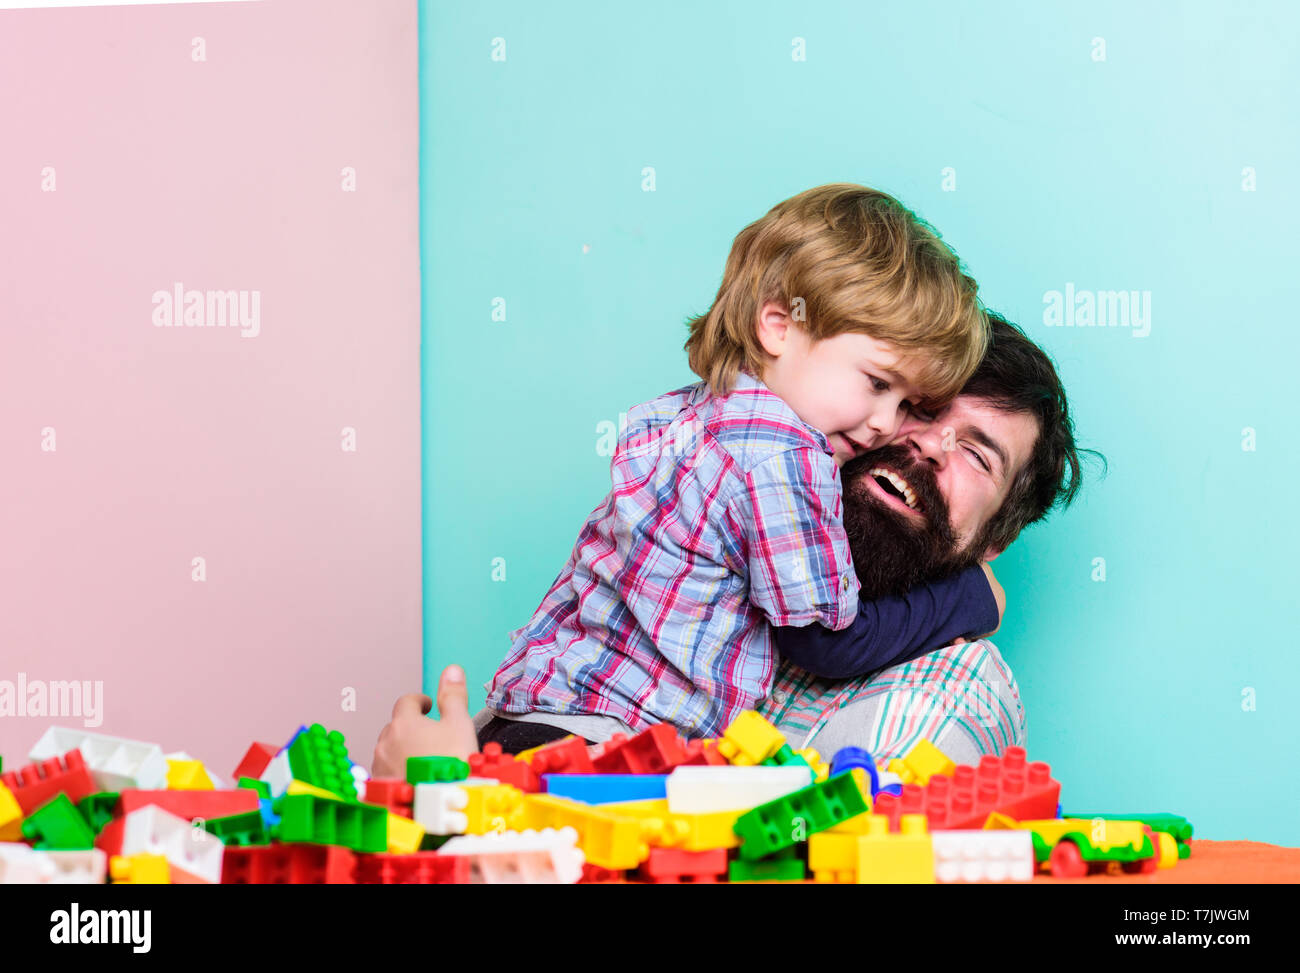 My family. father and son play game. small boy with dad playing together. happy family leisure. child development. building home with colorful constructor. I prepared surprise for you. i love you. Stock Photo